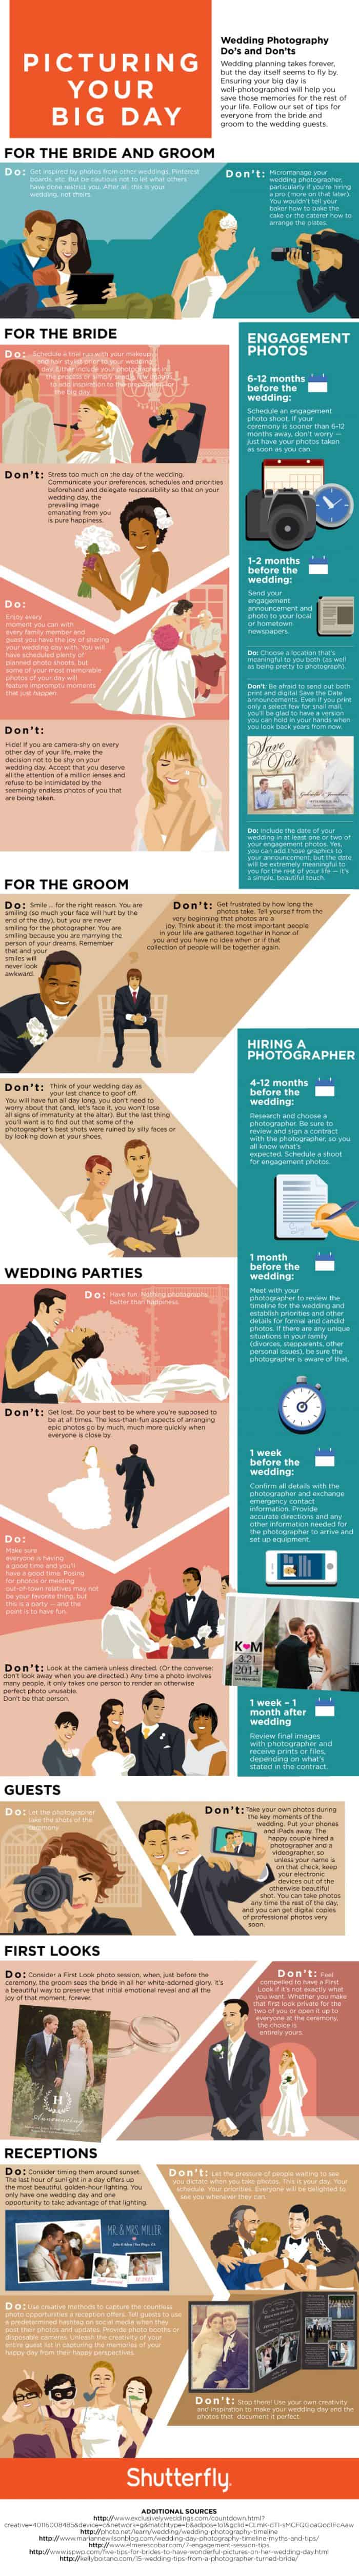 Wedding Photography Guide Infographic